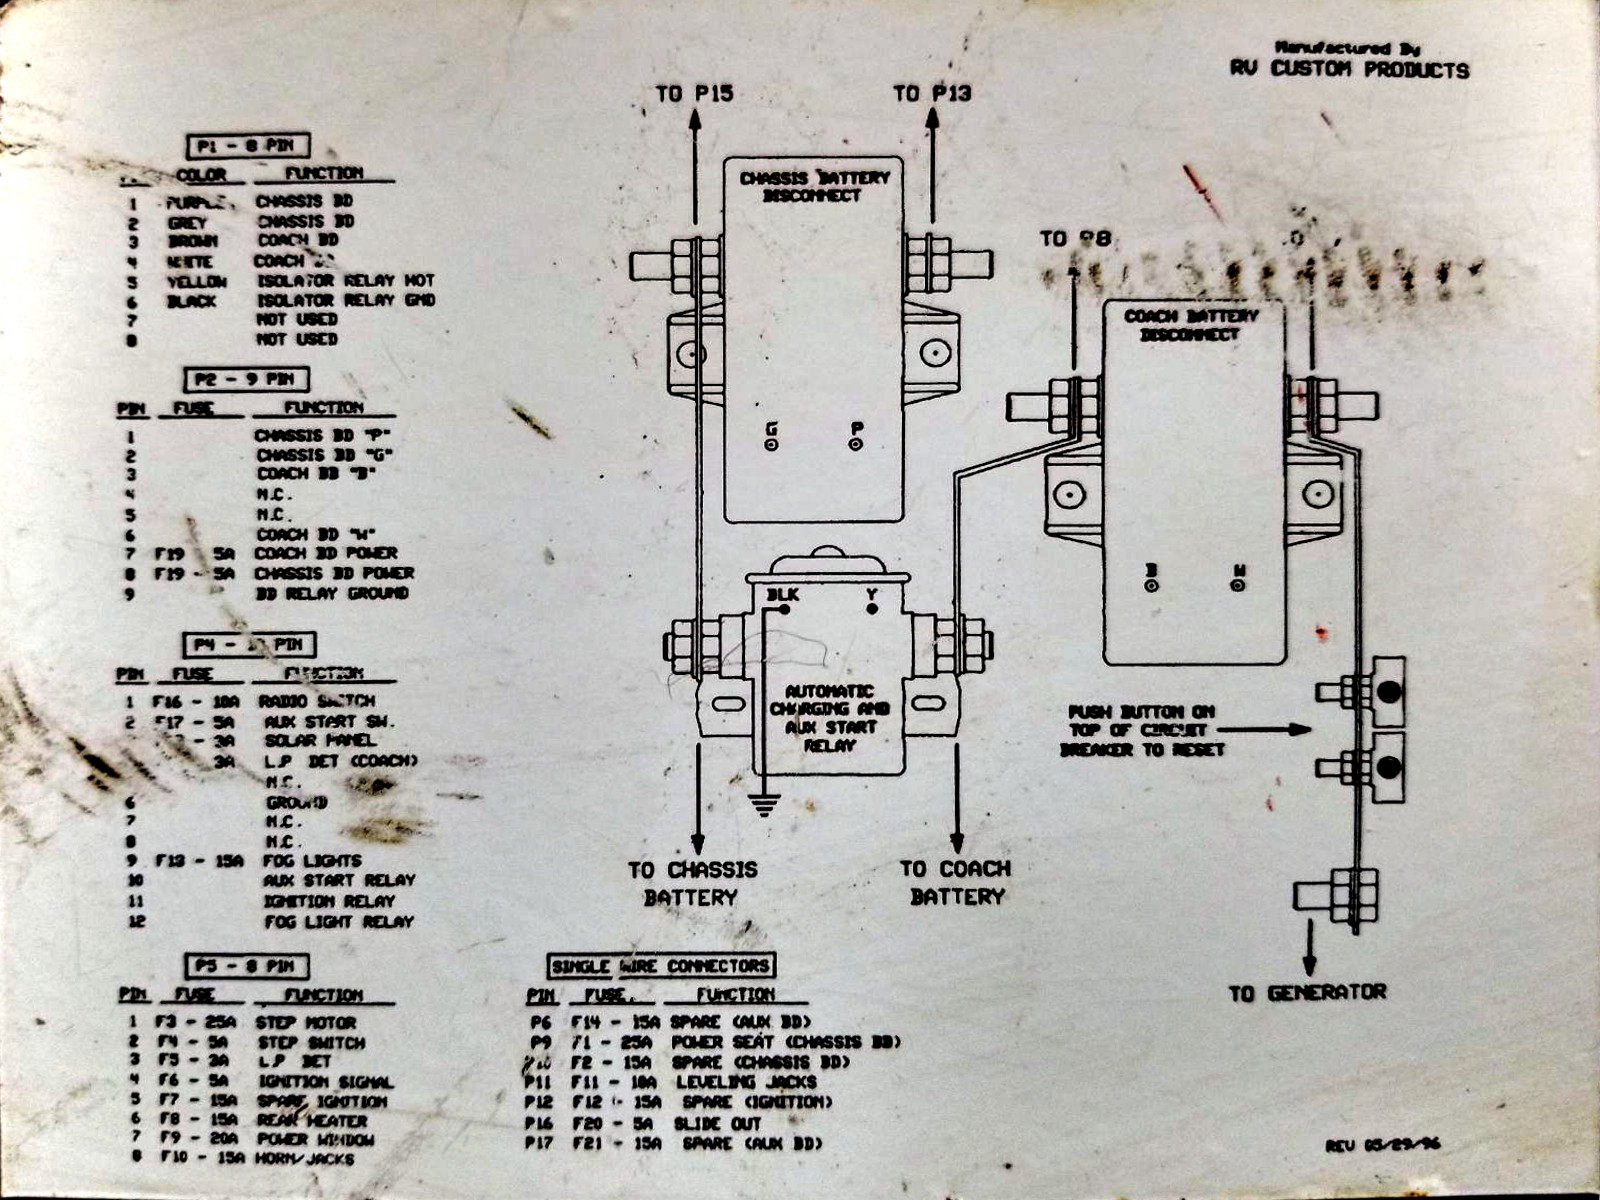 1998 Pace Arrow house batteries - iRV2 Forums  Fleetwood Pace Arrow Refridgerator Wiring Diagrams Pdf Free Download    iRV2 Forums